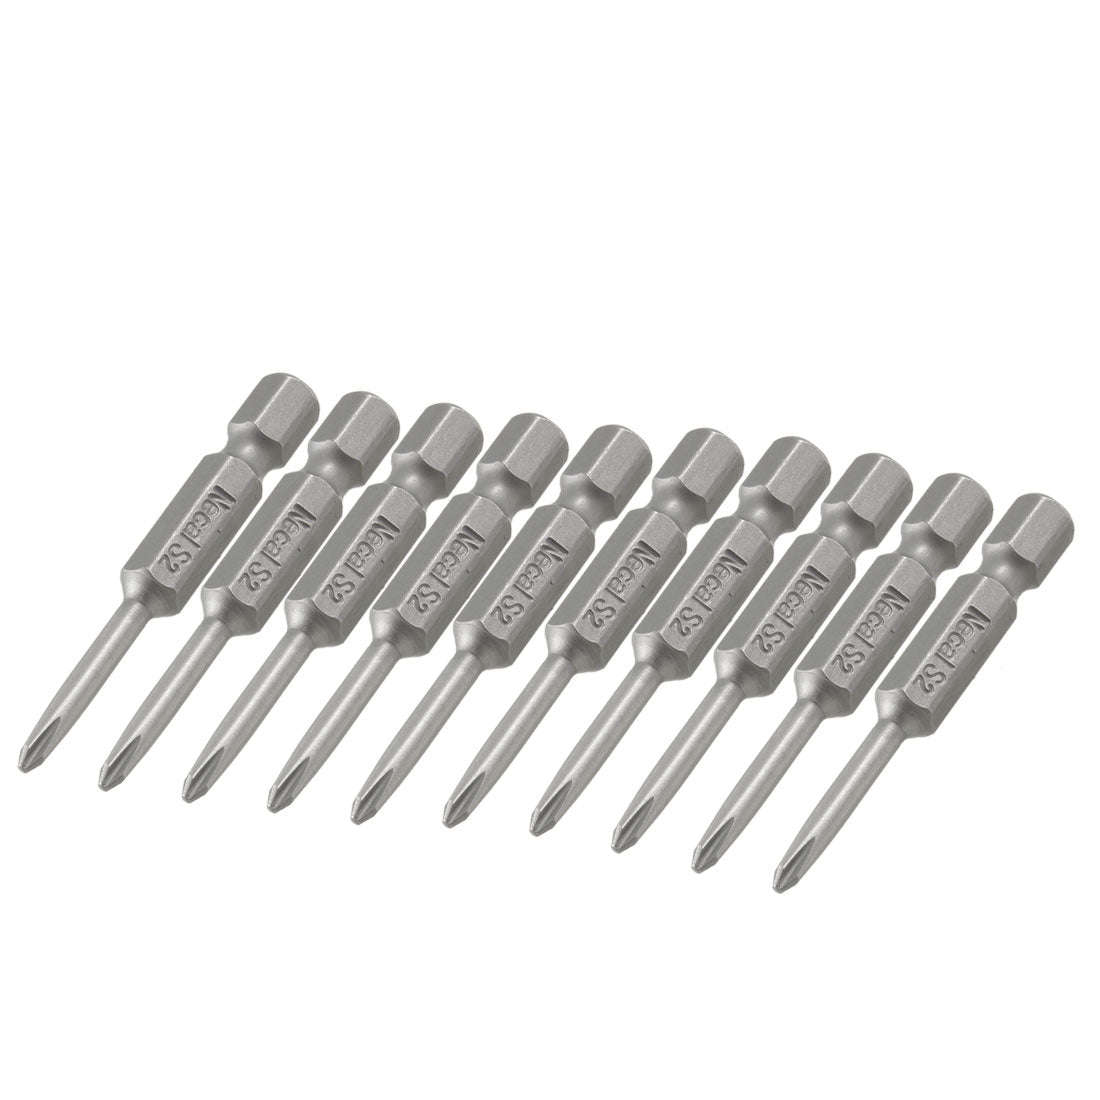 uxcell Uxcell 6.35mm Hex Shank Magnetic PH1 Phillips 3mm Cross Head Insert Bits x 10